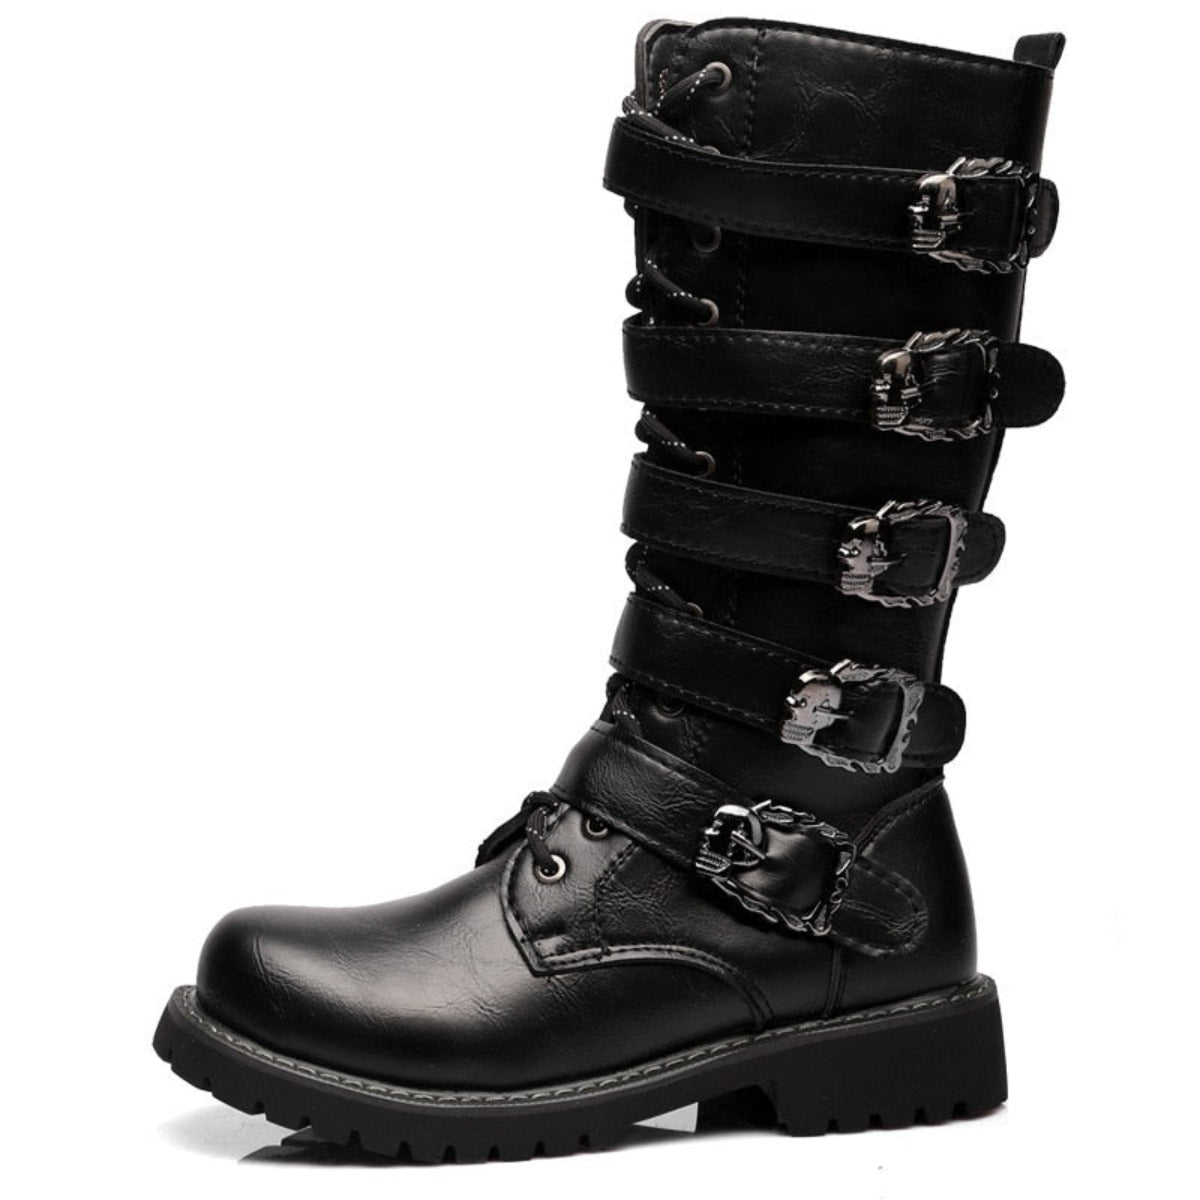 Mid-Calf Leather Motorcycle Riding Boots | American Legend Rider